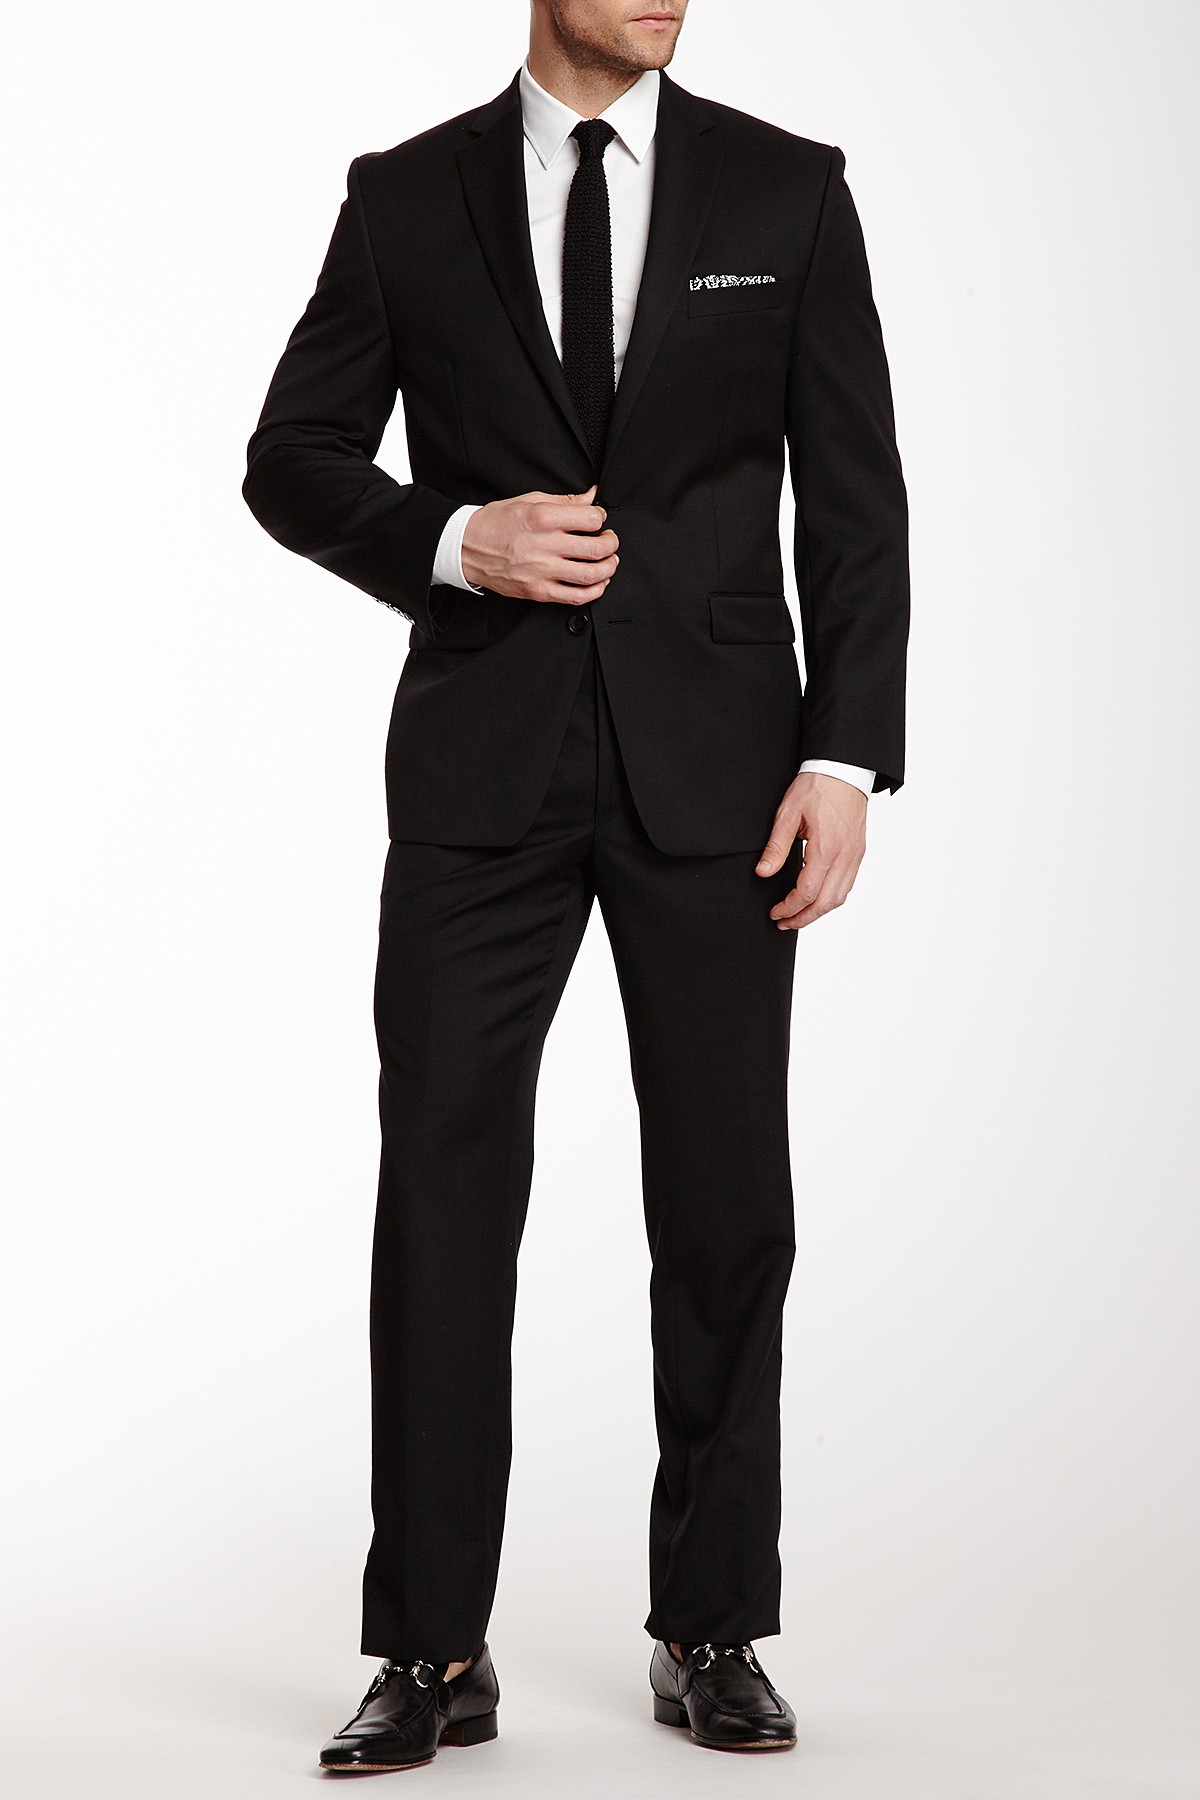 Calvin Klein suits image of calvin klein black solid two button notch lapel wool suit MLGCVLK